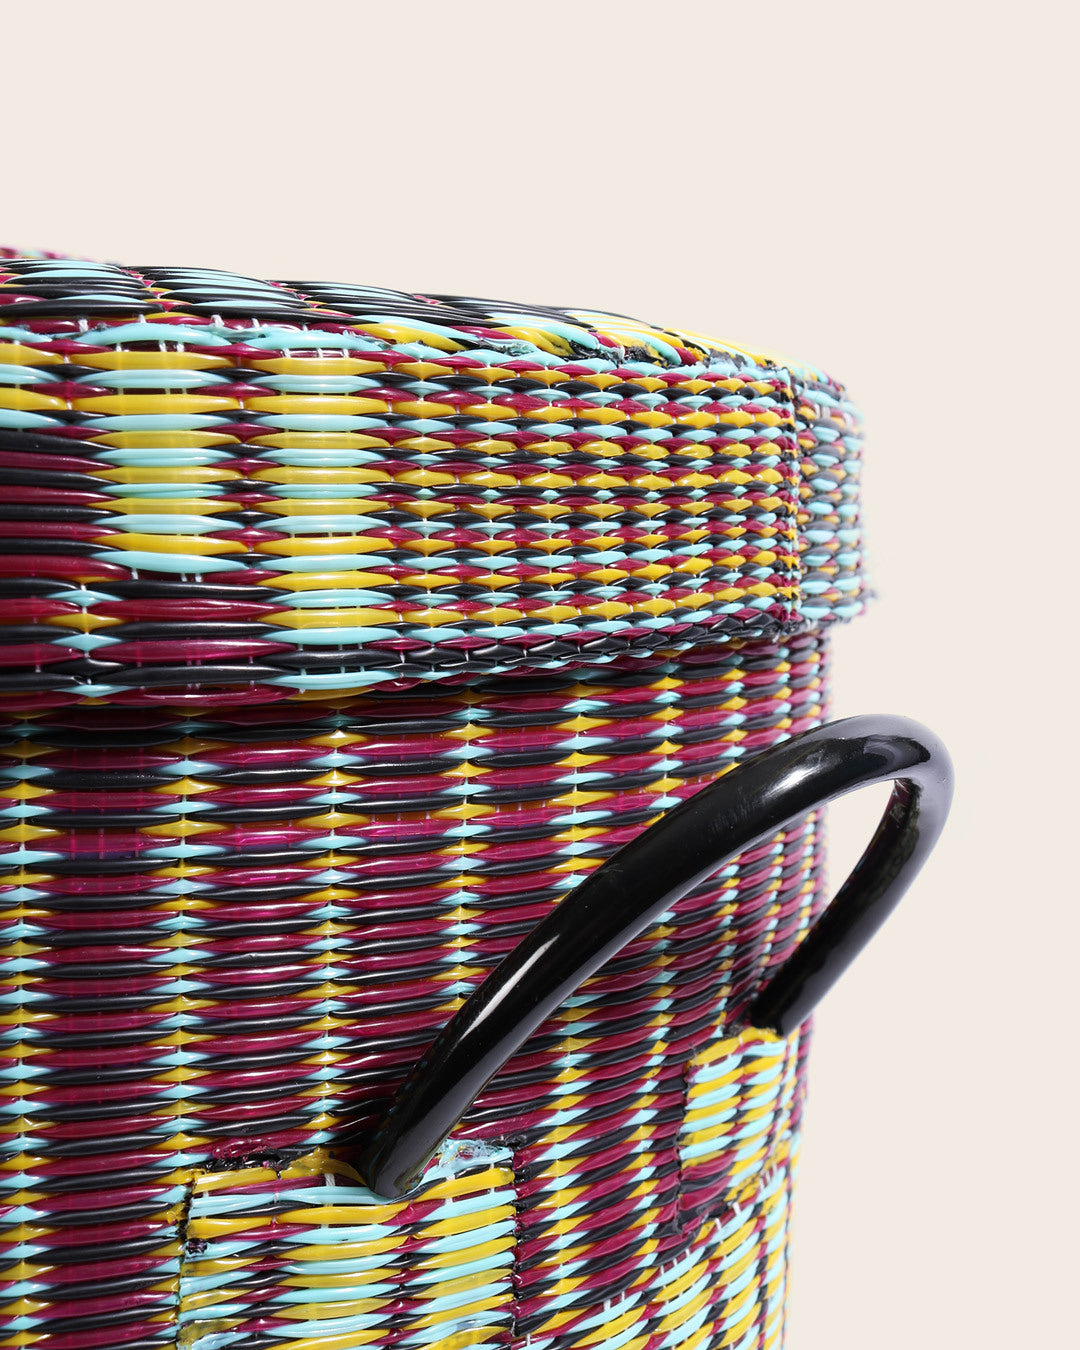 Handwoven Basket with Lid, No 3